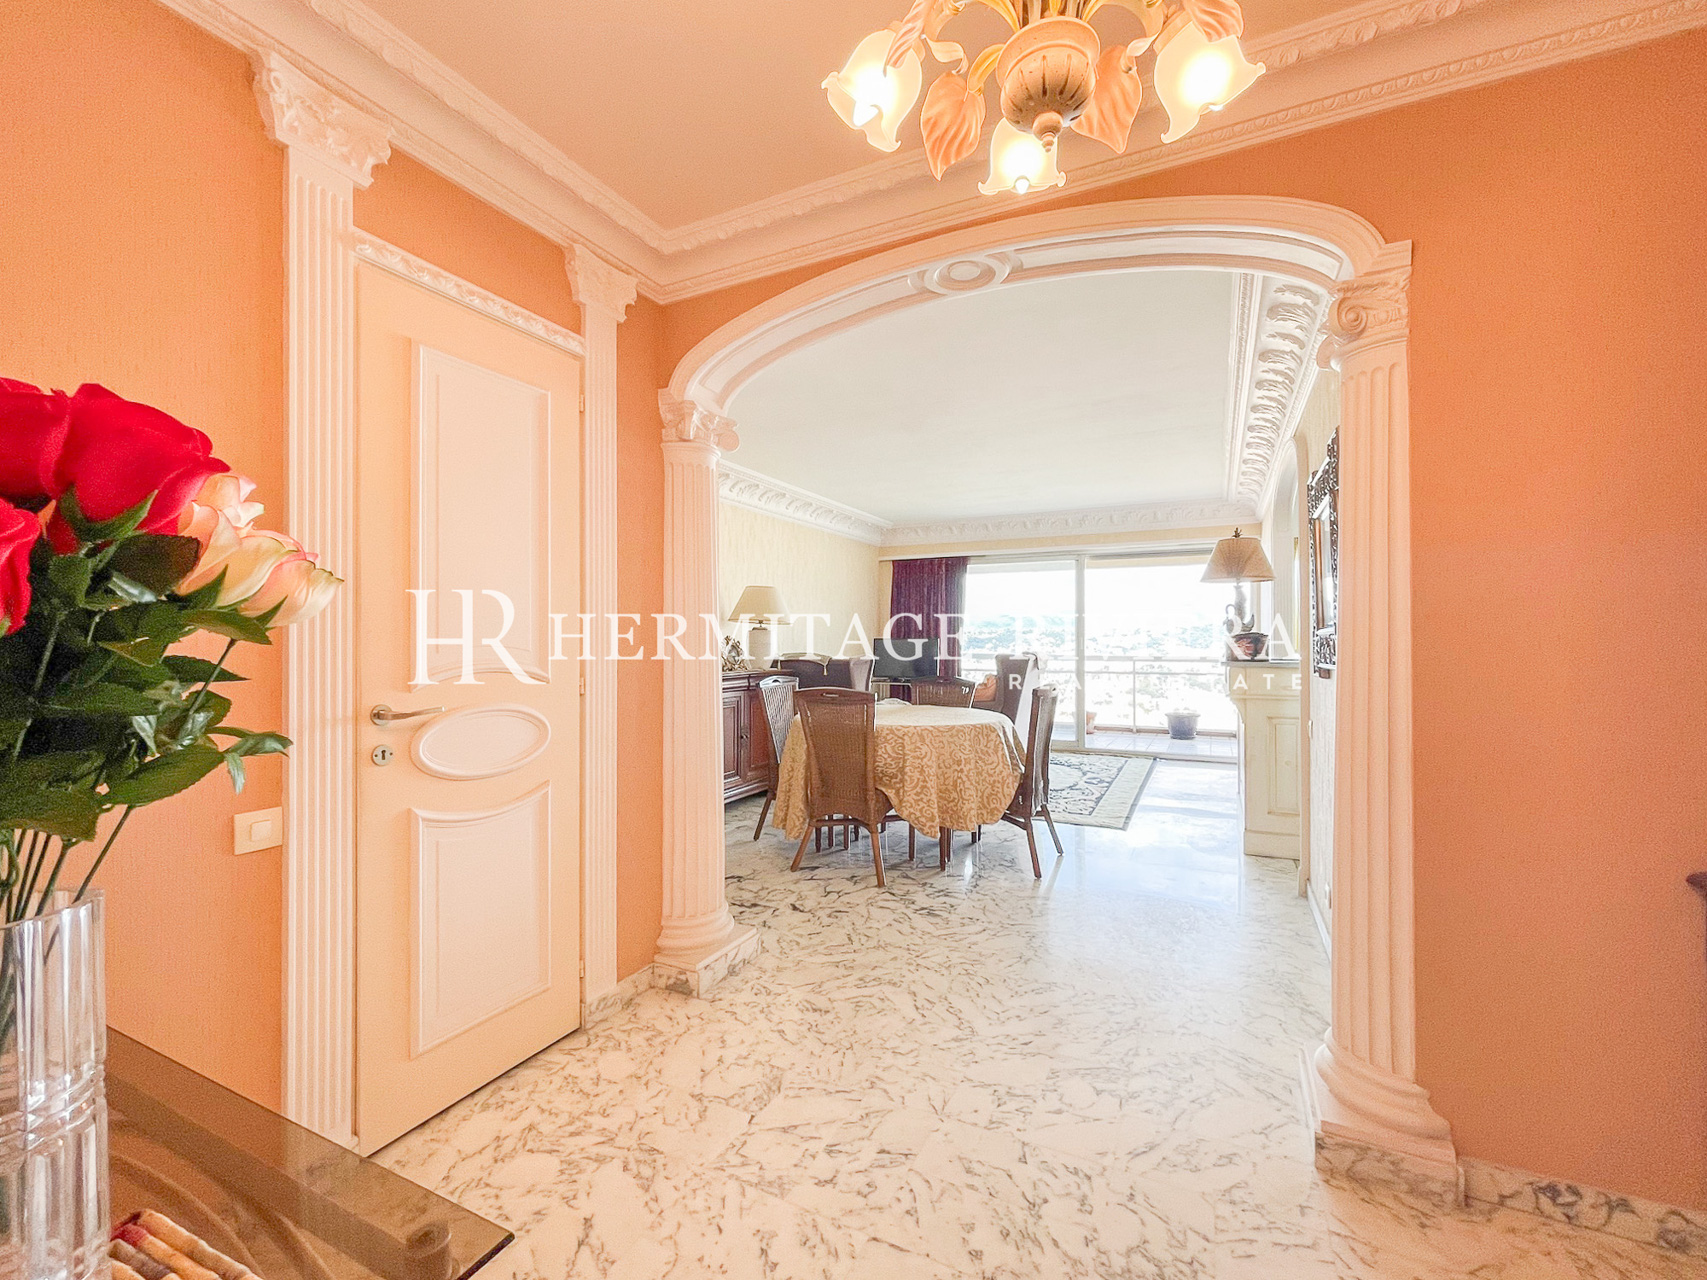 Top floor two bedroom apartment with views over Nice and the sea (image 13)